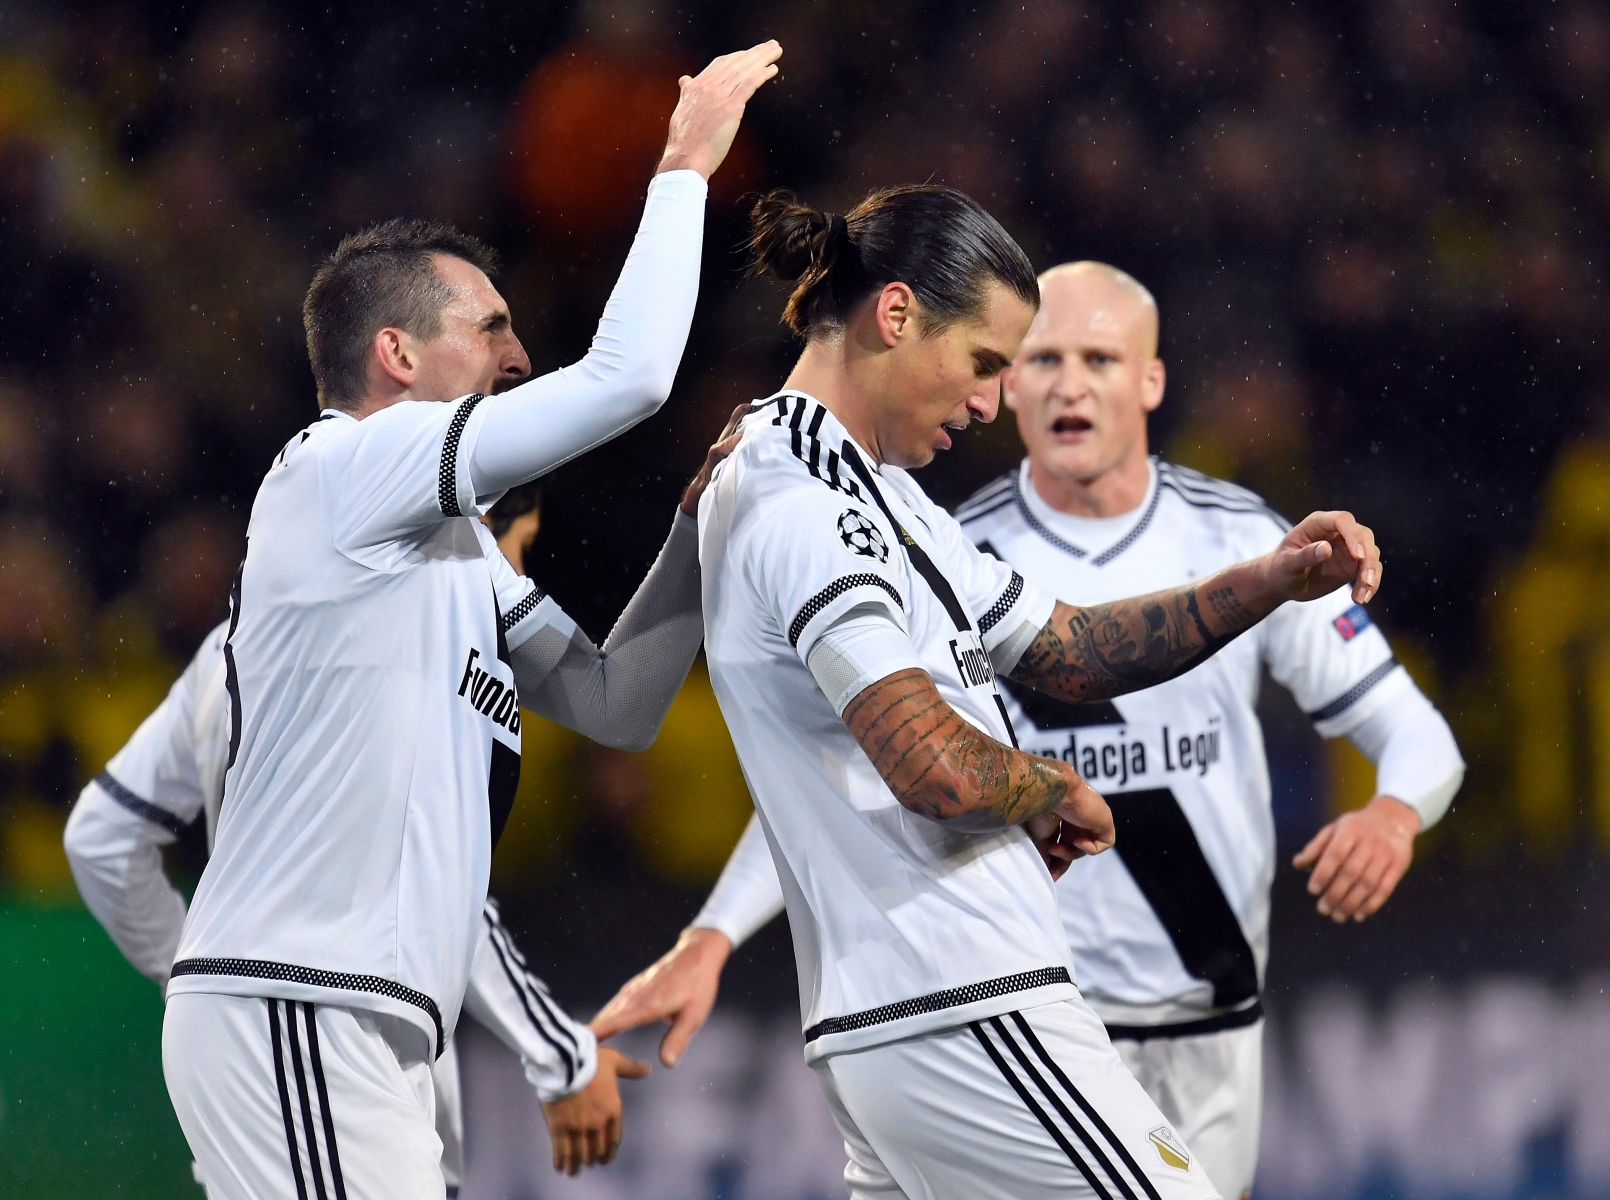 Legia's scorer Aleksandar Prijovic, center, and his teammates celebrate the opening goal during the Champions League Group F soccer match between Borussia Dortmund and Legia Warsaw in Dortmund, Germany, Tuesday, Nov. 22, 2016. (AP Photo/Martin Meissner) Germany Soccer Champions League